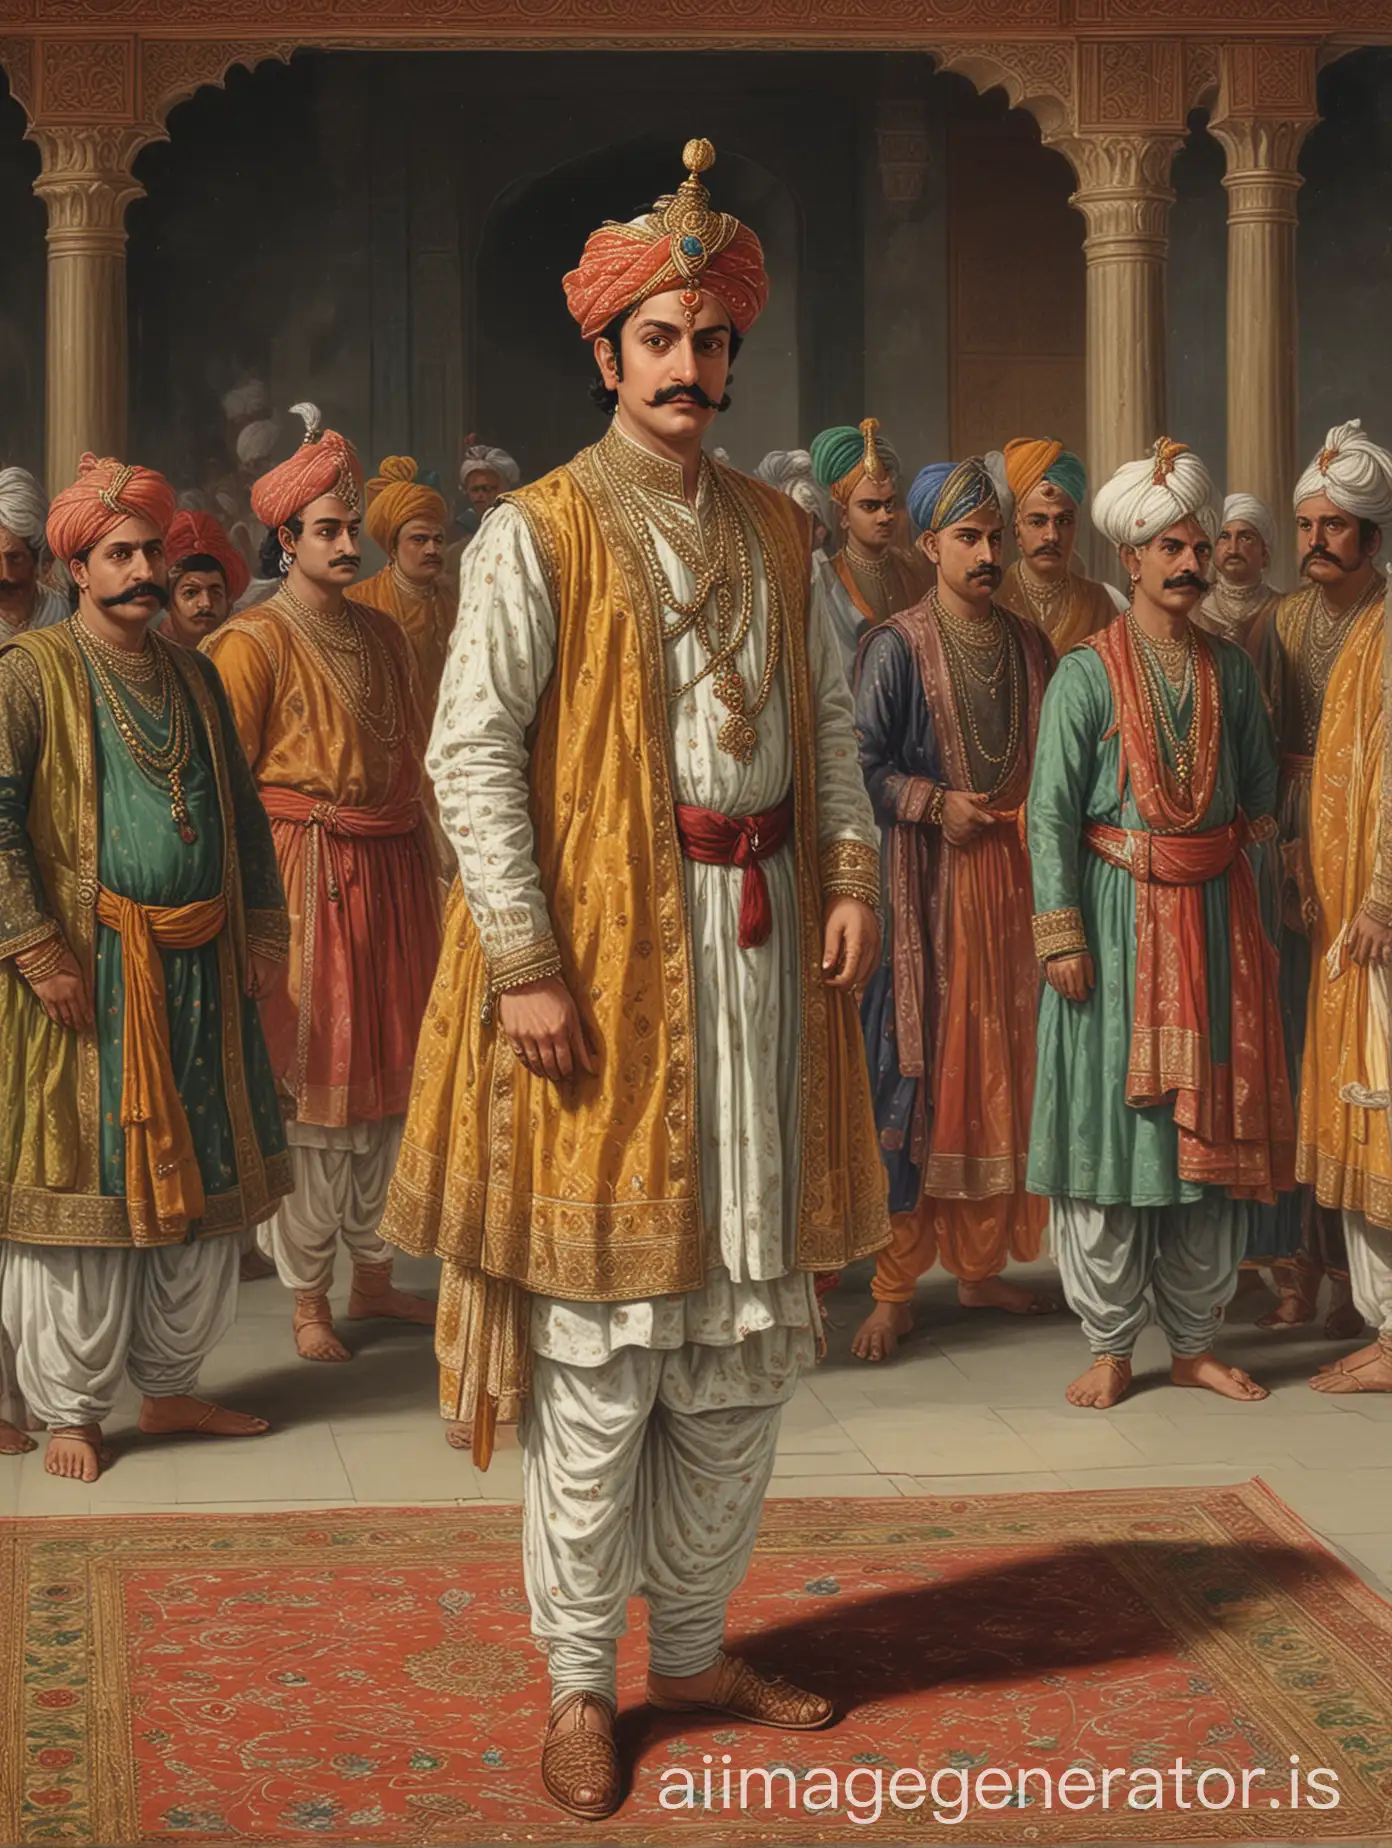 Birbal standing confidently before Emperor Akbar in the court. He is dressed in traditional Mughal attire with a calm, confident expression. The angle is slightly lower, looking up at Birbal to emphasize his confidence, with Akbar and the courtiers visible in the background, watching him.